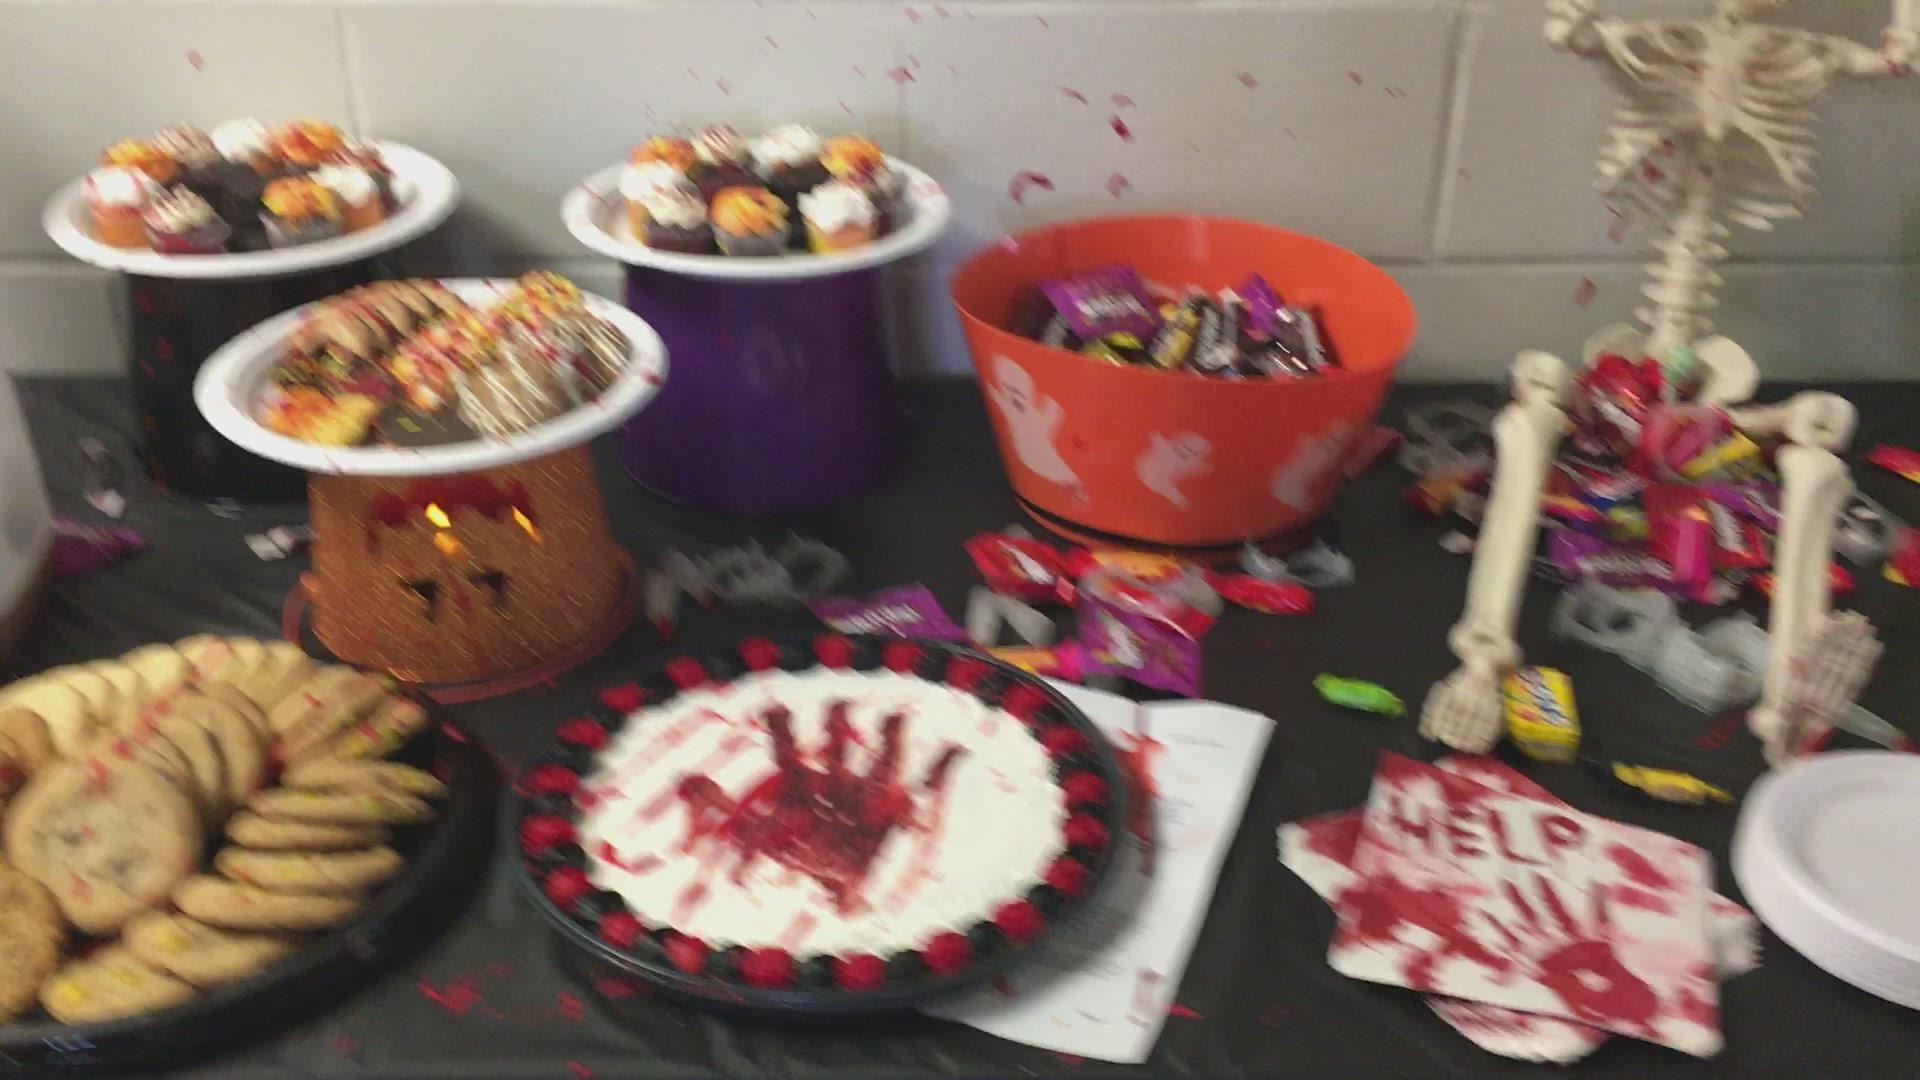 6 News went all out for Halloween 2019, including a disgustingly delicious dessert table.